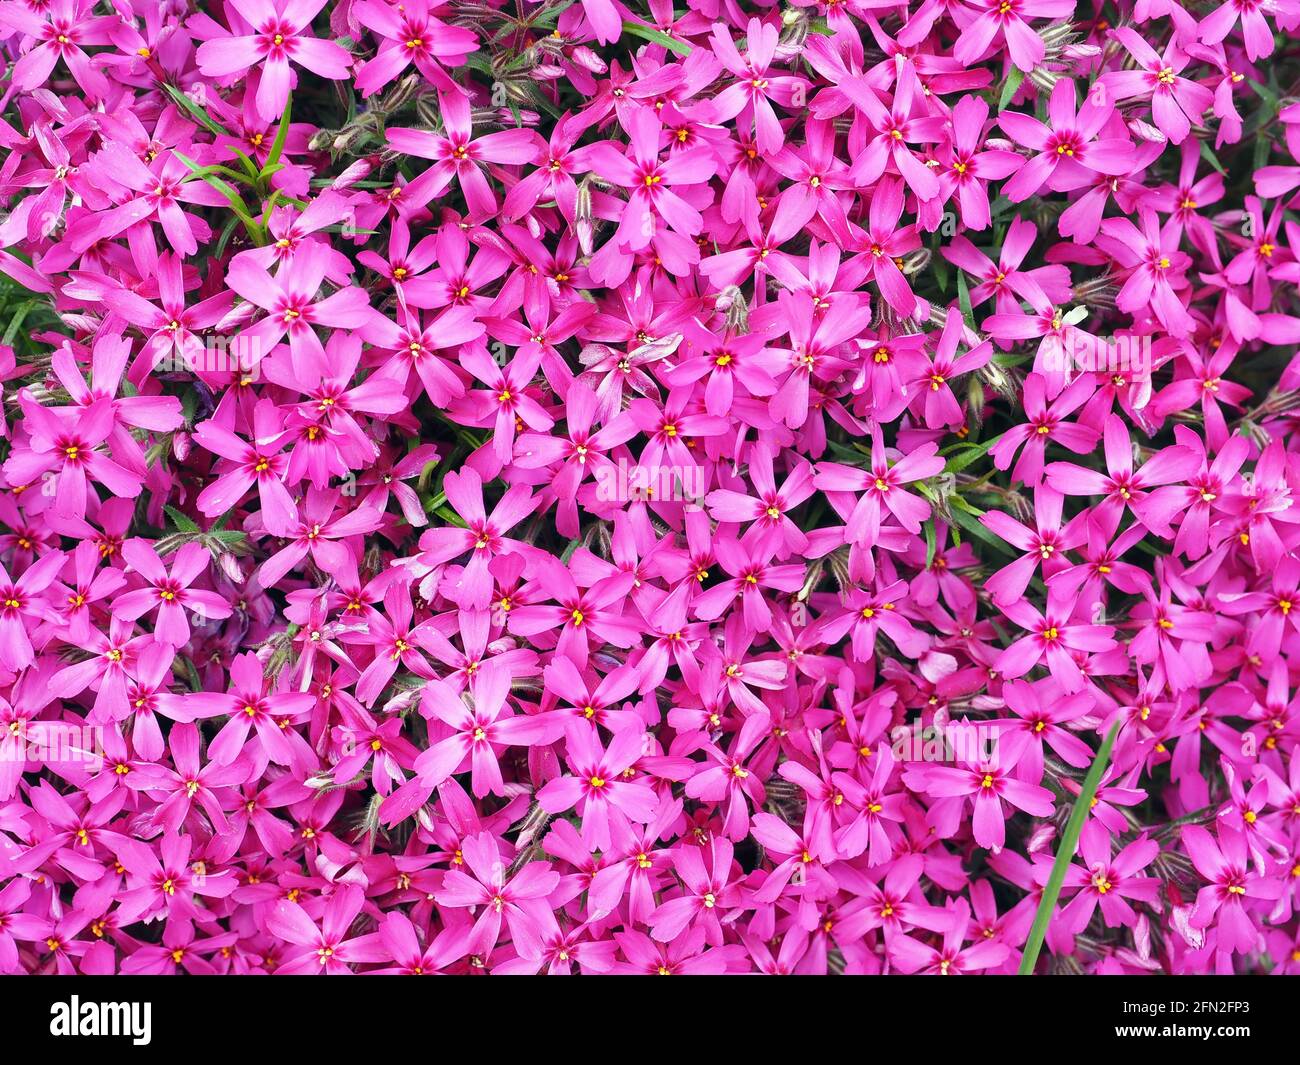 Background with numerous small pink phlox subulata flowers during a sunny day Stock Photo